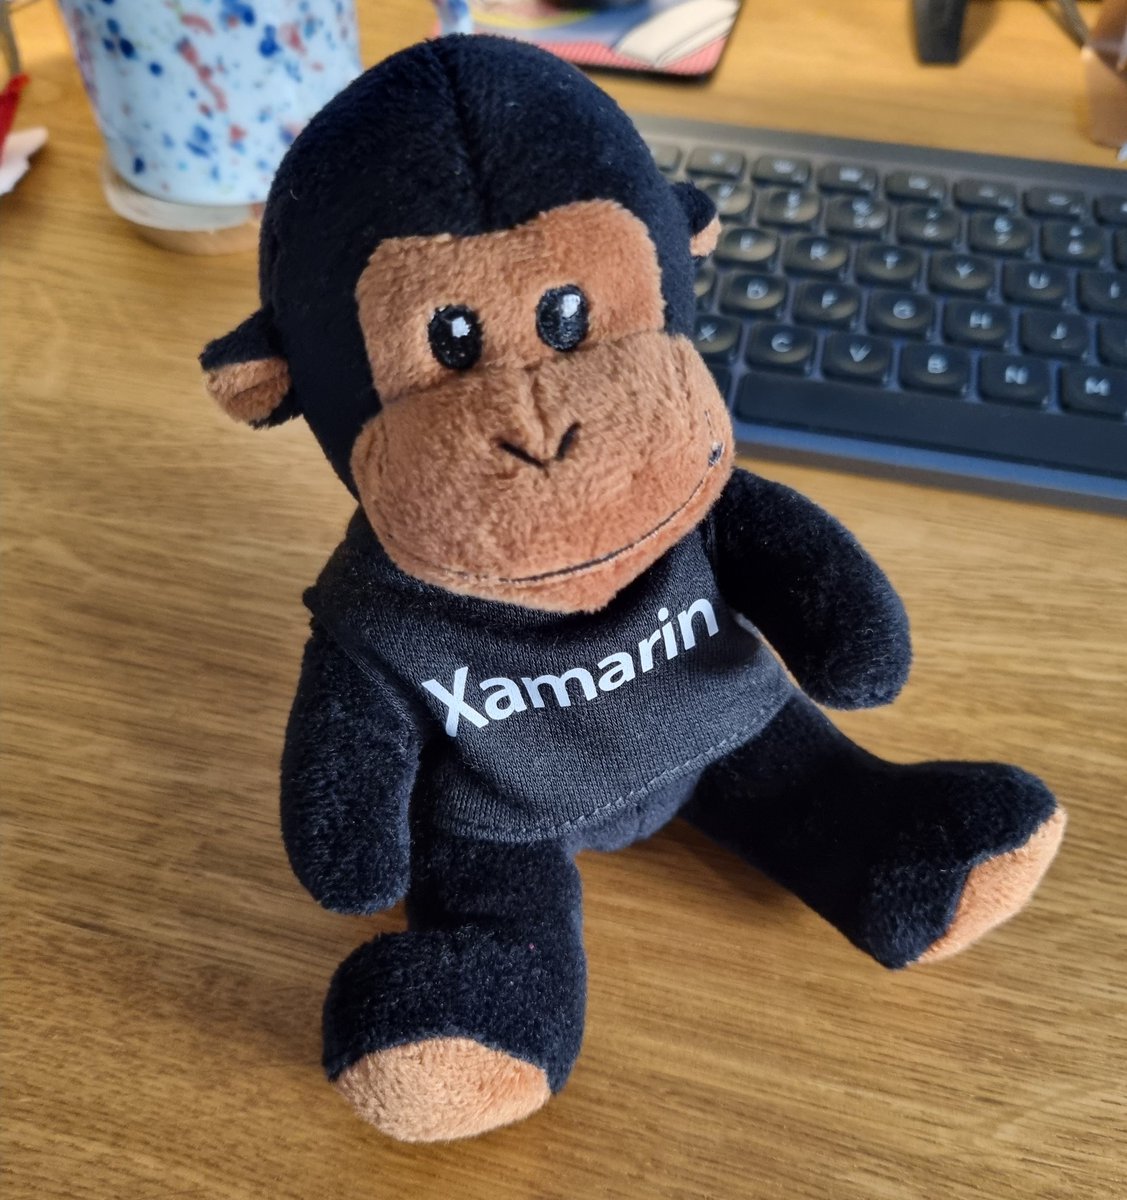 #XamarinGaveMe my first job in mobile development. I might have lost some hair along the way though ;) Technologies come and go, I suppose...